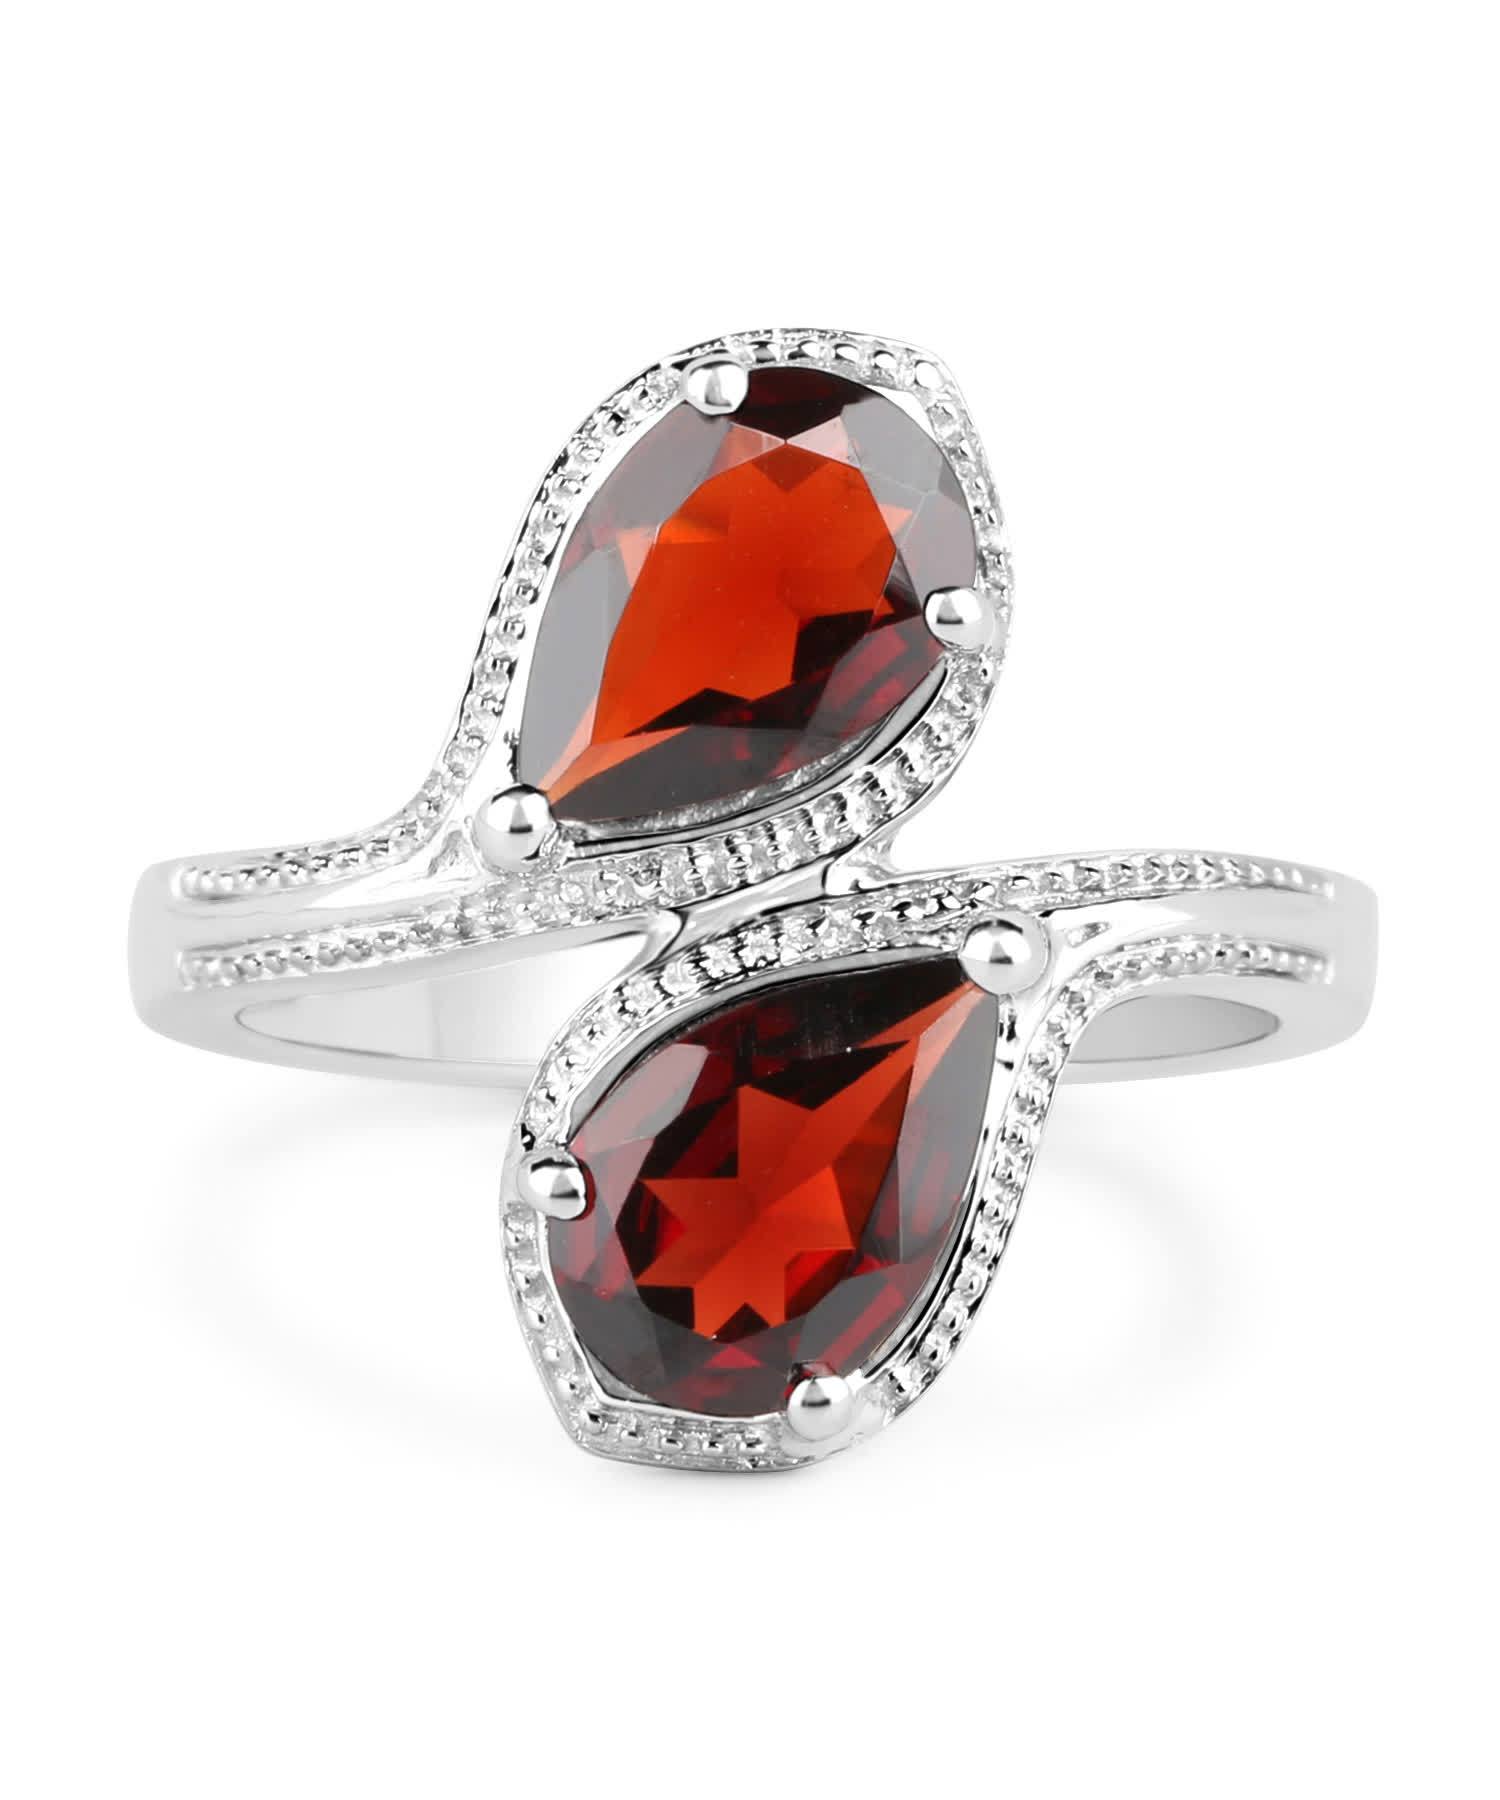 2.60ctw Natural Garnet Rhodium Plated 925 Sterling Silver Two-Stone Ring View 3